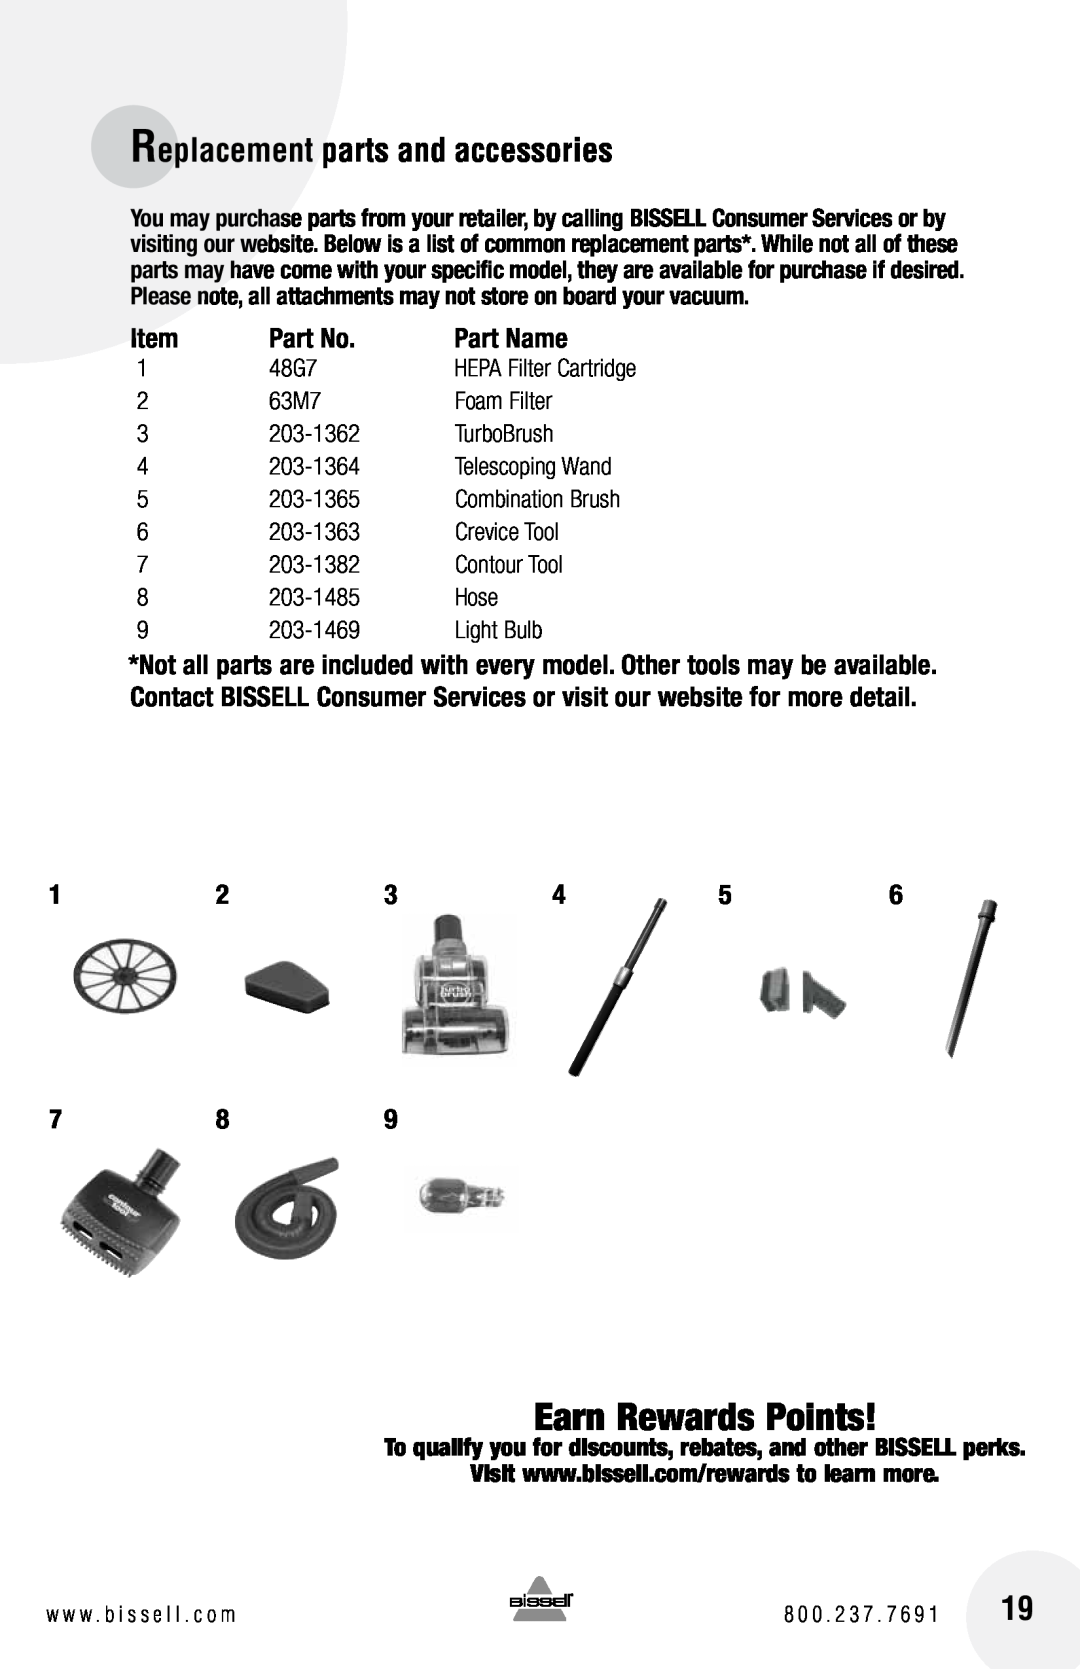 Bissell 16N5 Replacement parts and accessories, Part Name, To qualify you for discounts, rebates, and other BISSELL perks 